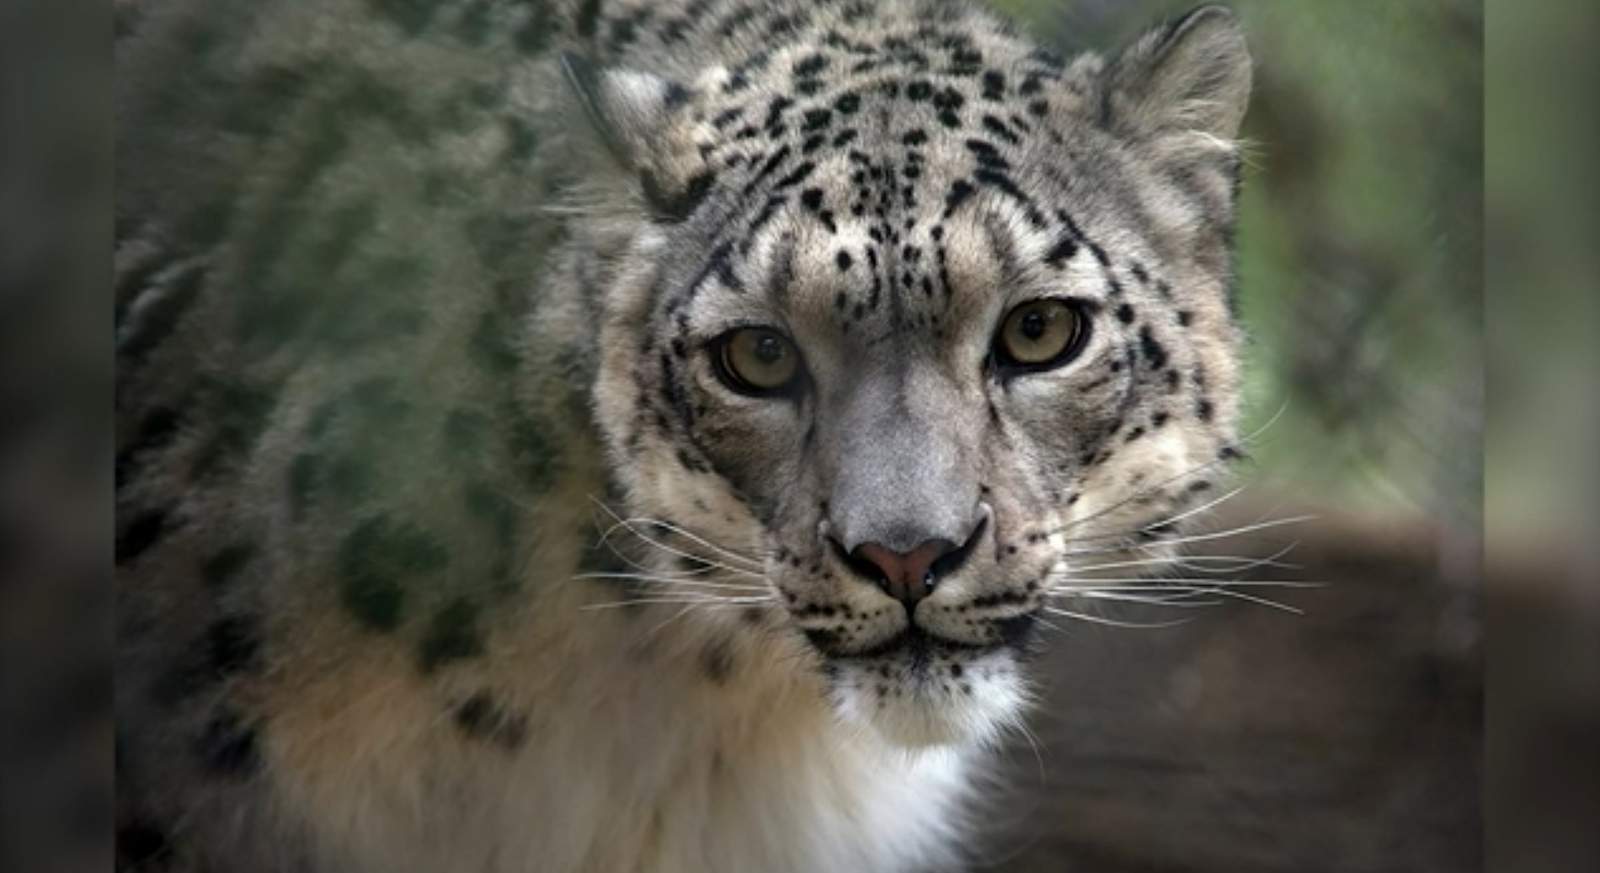 Snow leopard tests positive for COVID-19; zookeeper may have spread virus